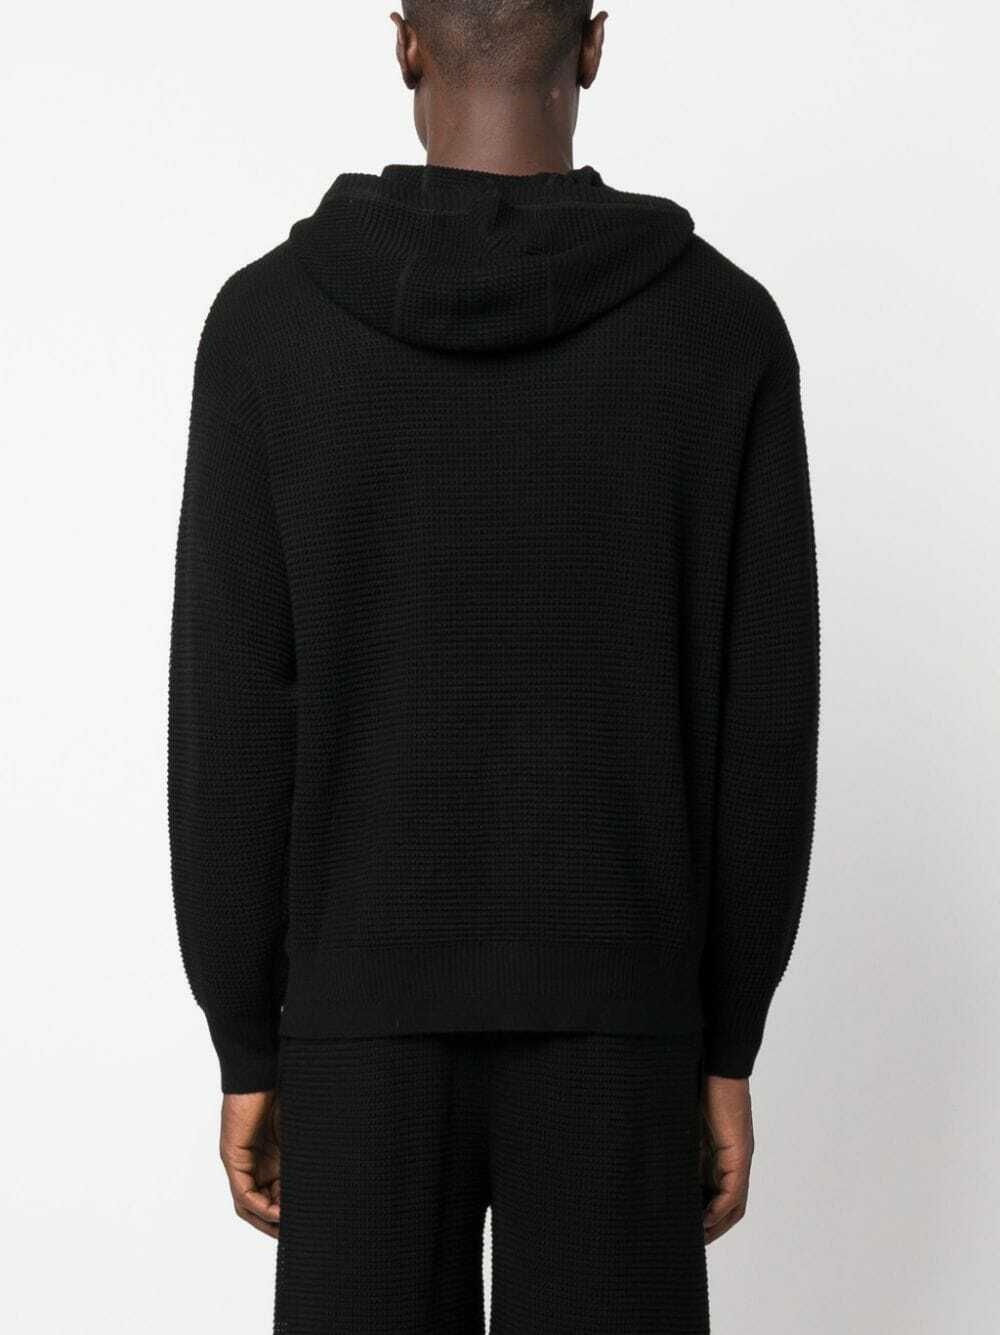 EMPORIO ARMANI - Knitted Hoodie